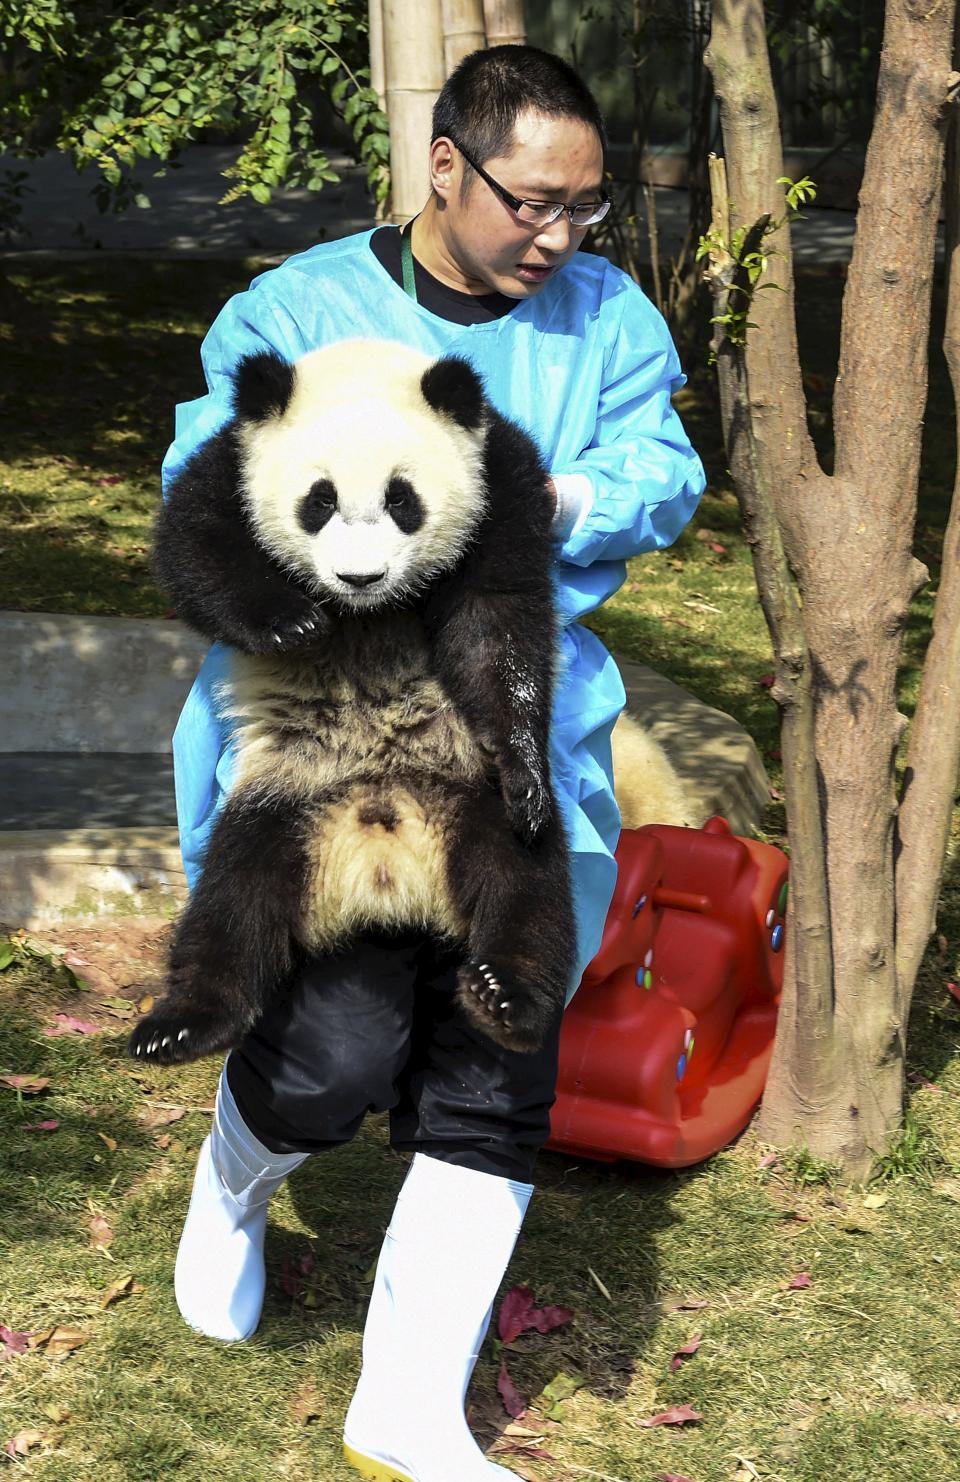 Police in southwestern China arrested 10 people for killing a female wild giant panda and buying and selling its parts, state media said Wednesday.